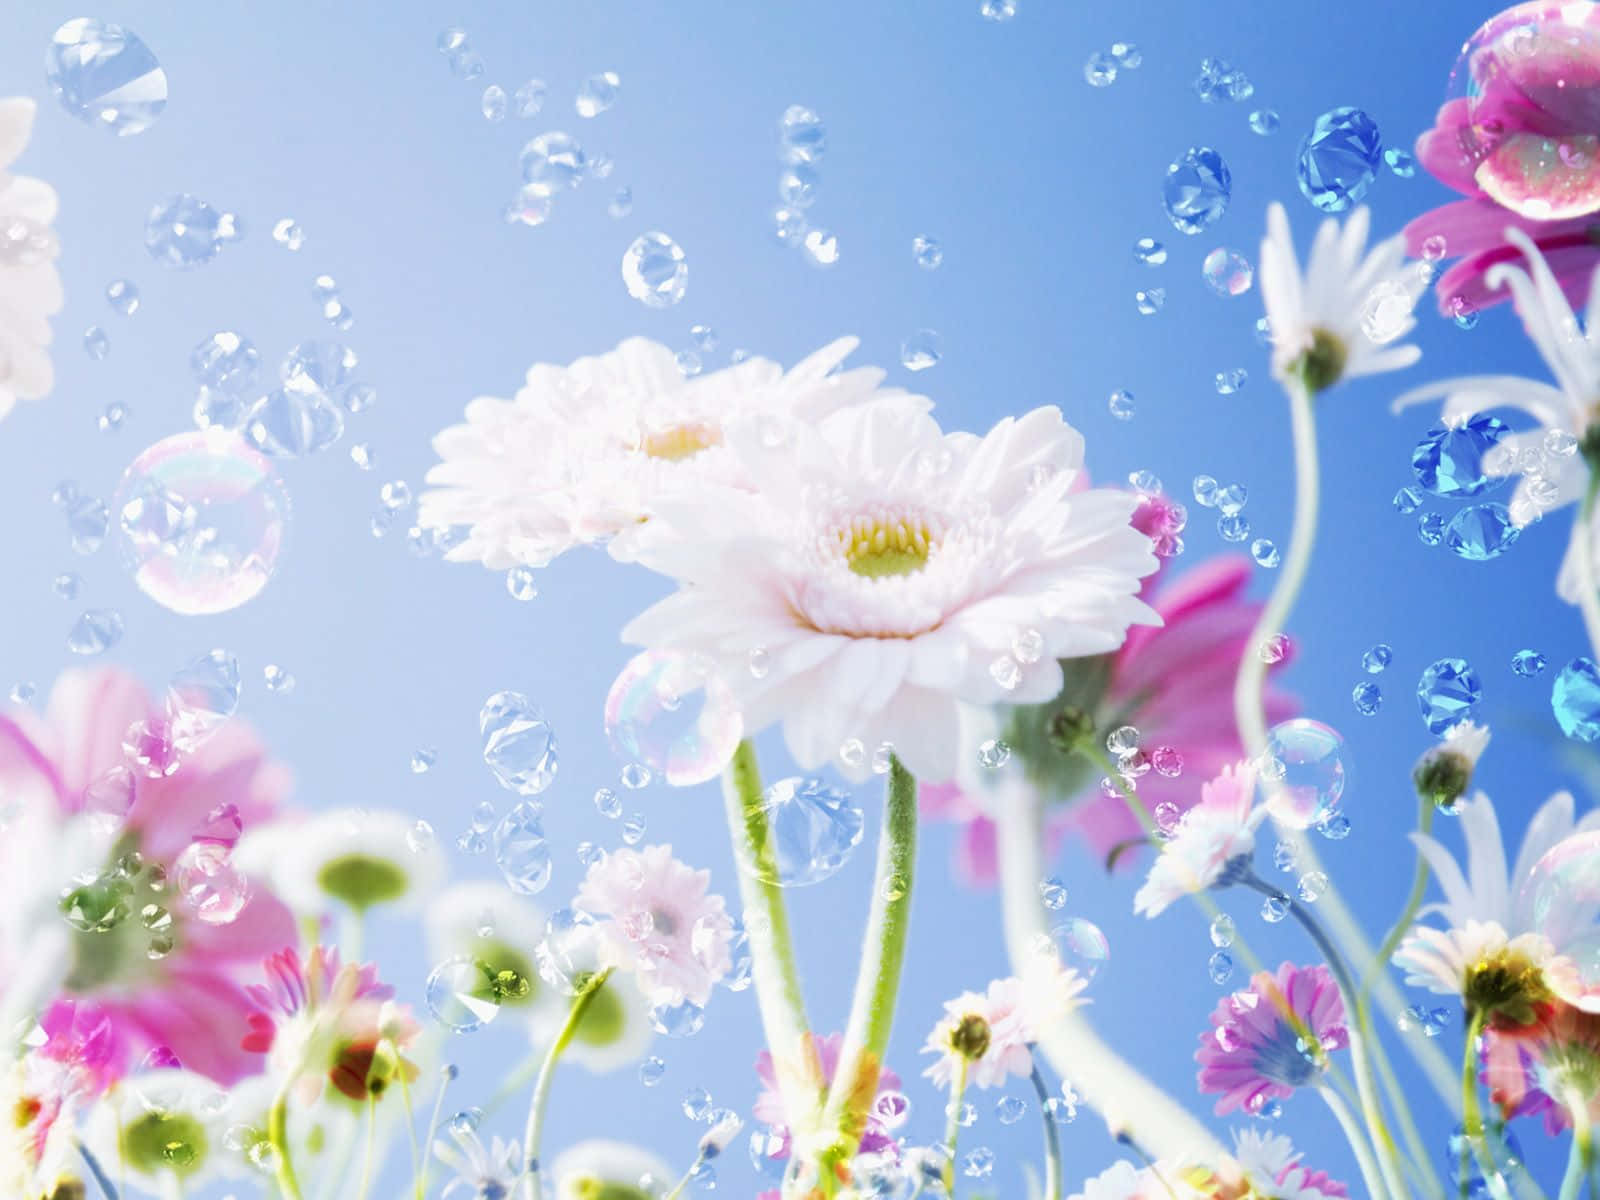 flowers and bubbles in the sky